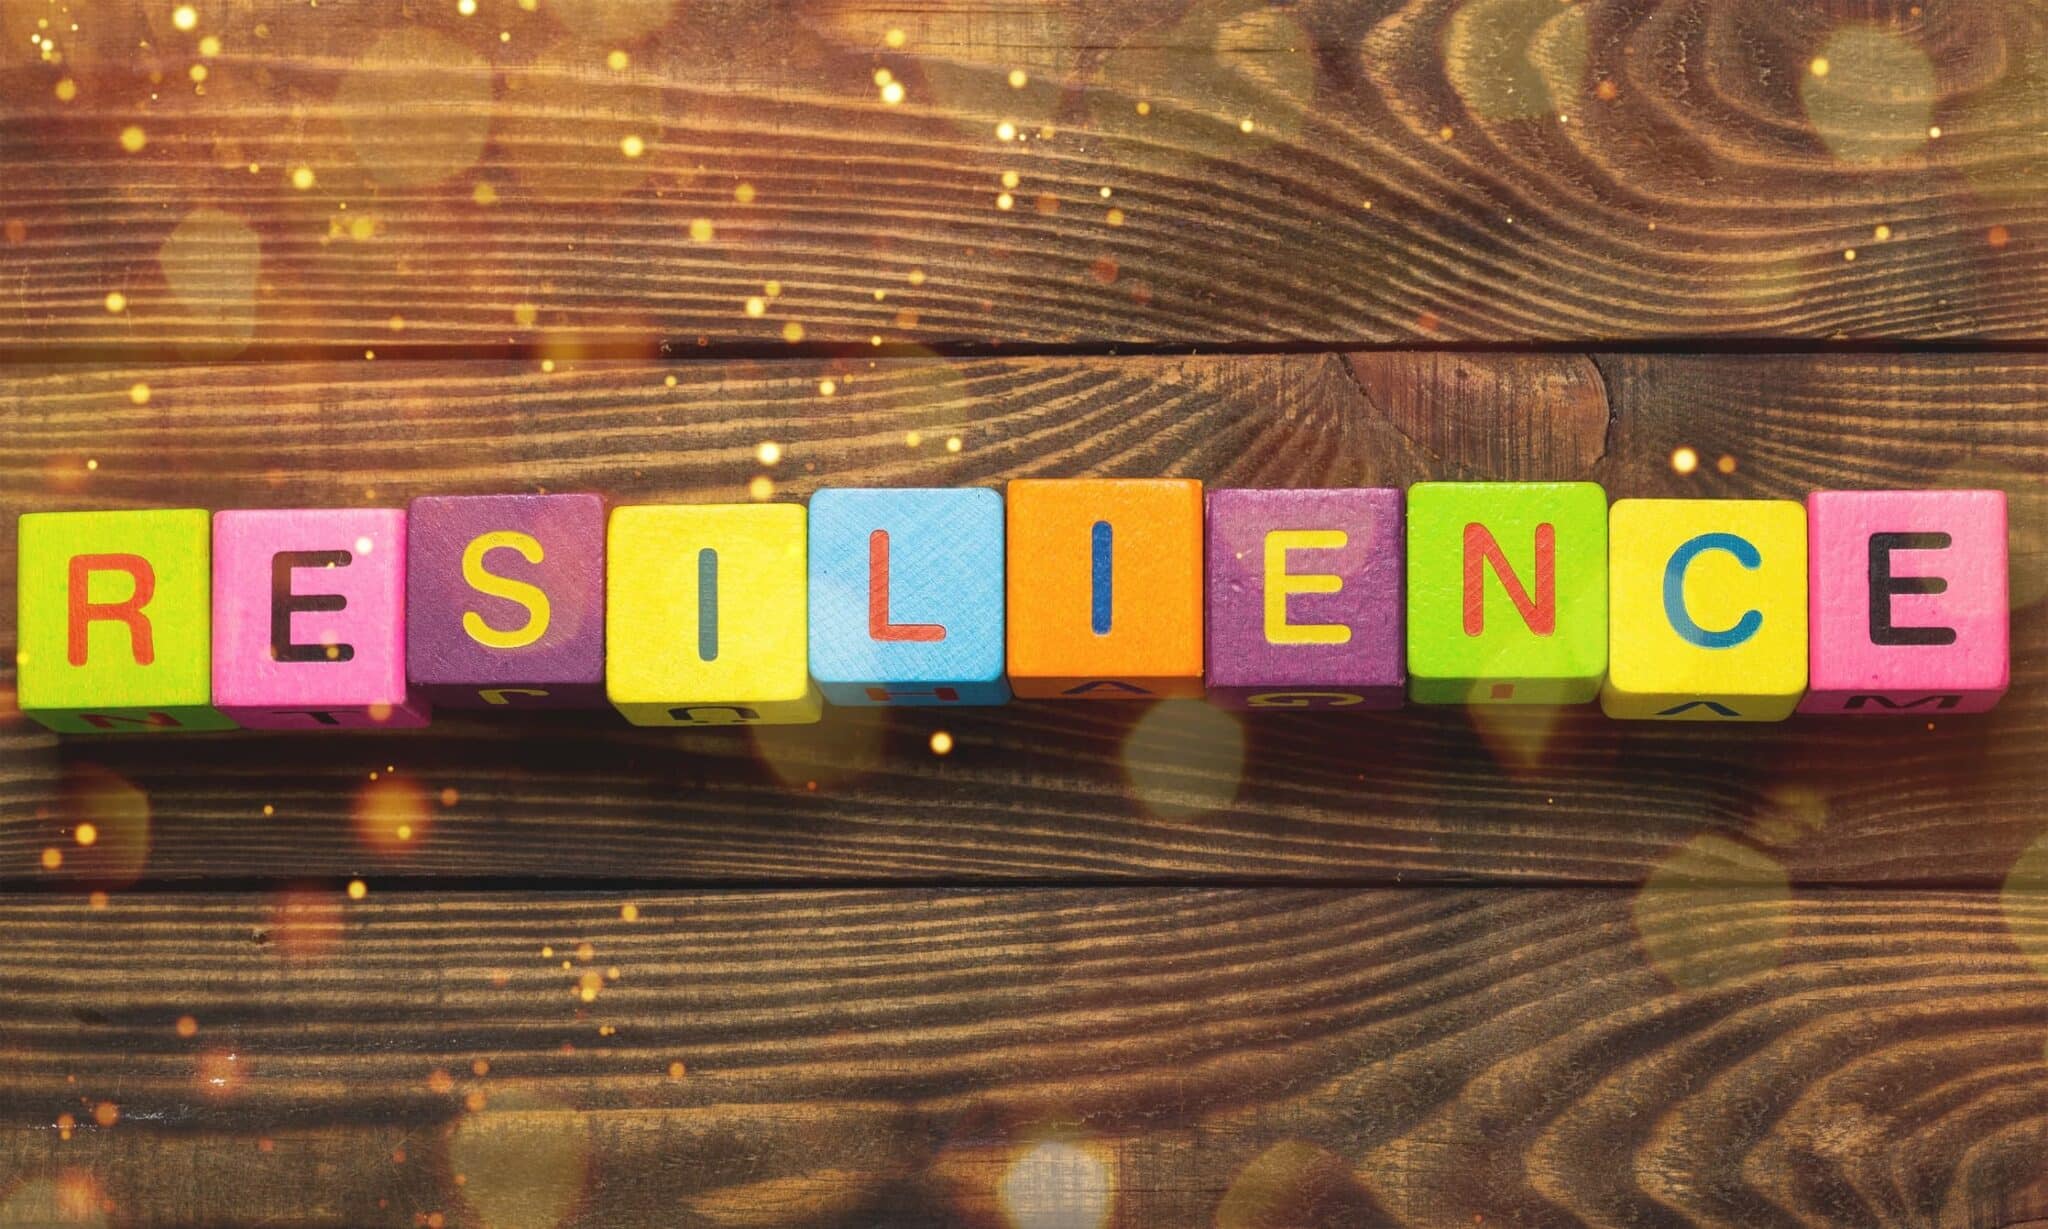 The word resilience creatively displayed in colorful blocks on a wooden background, inspiring ways to build resilience.